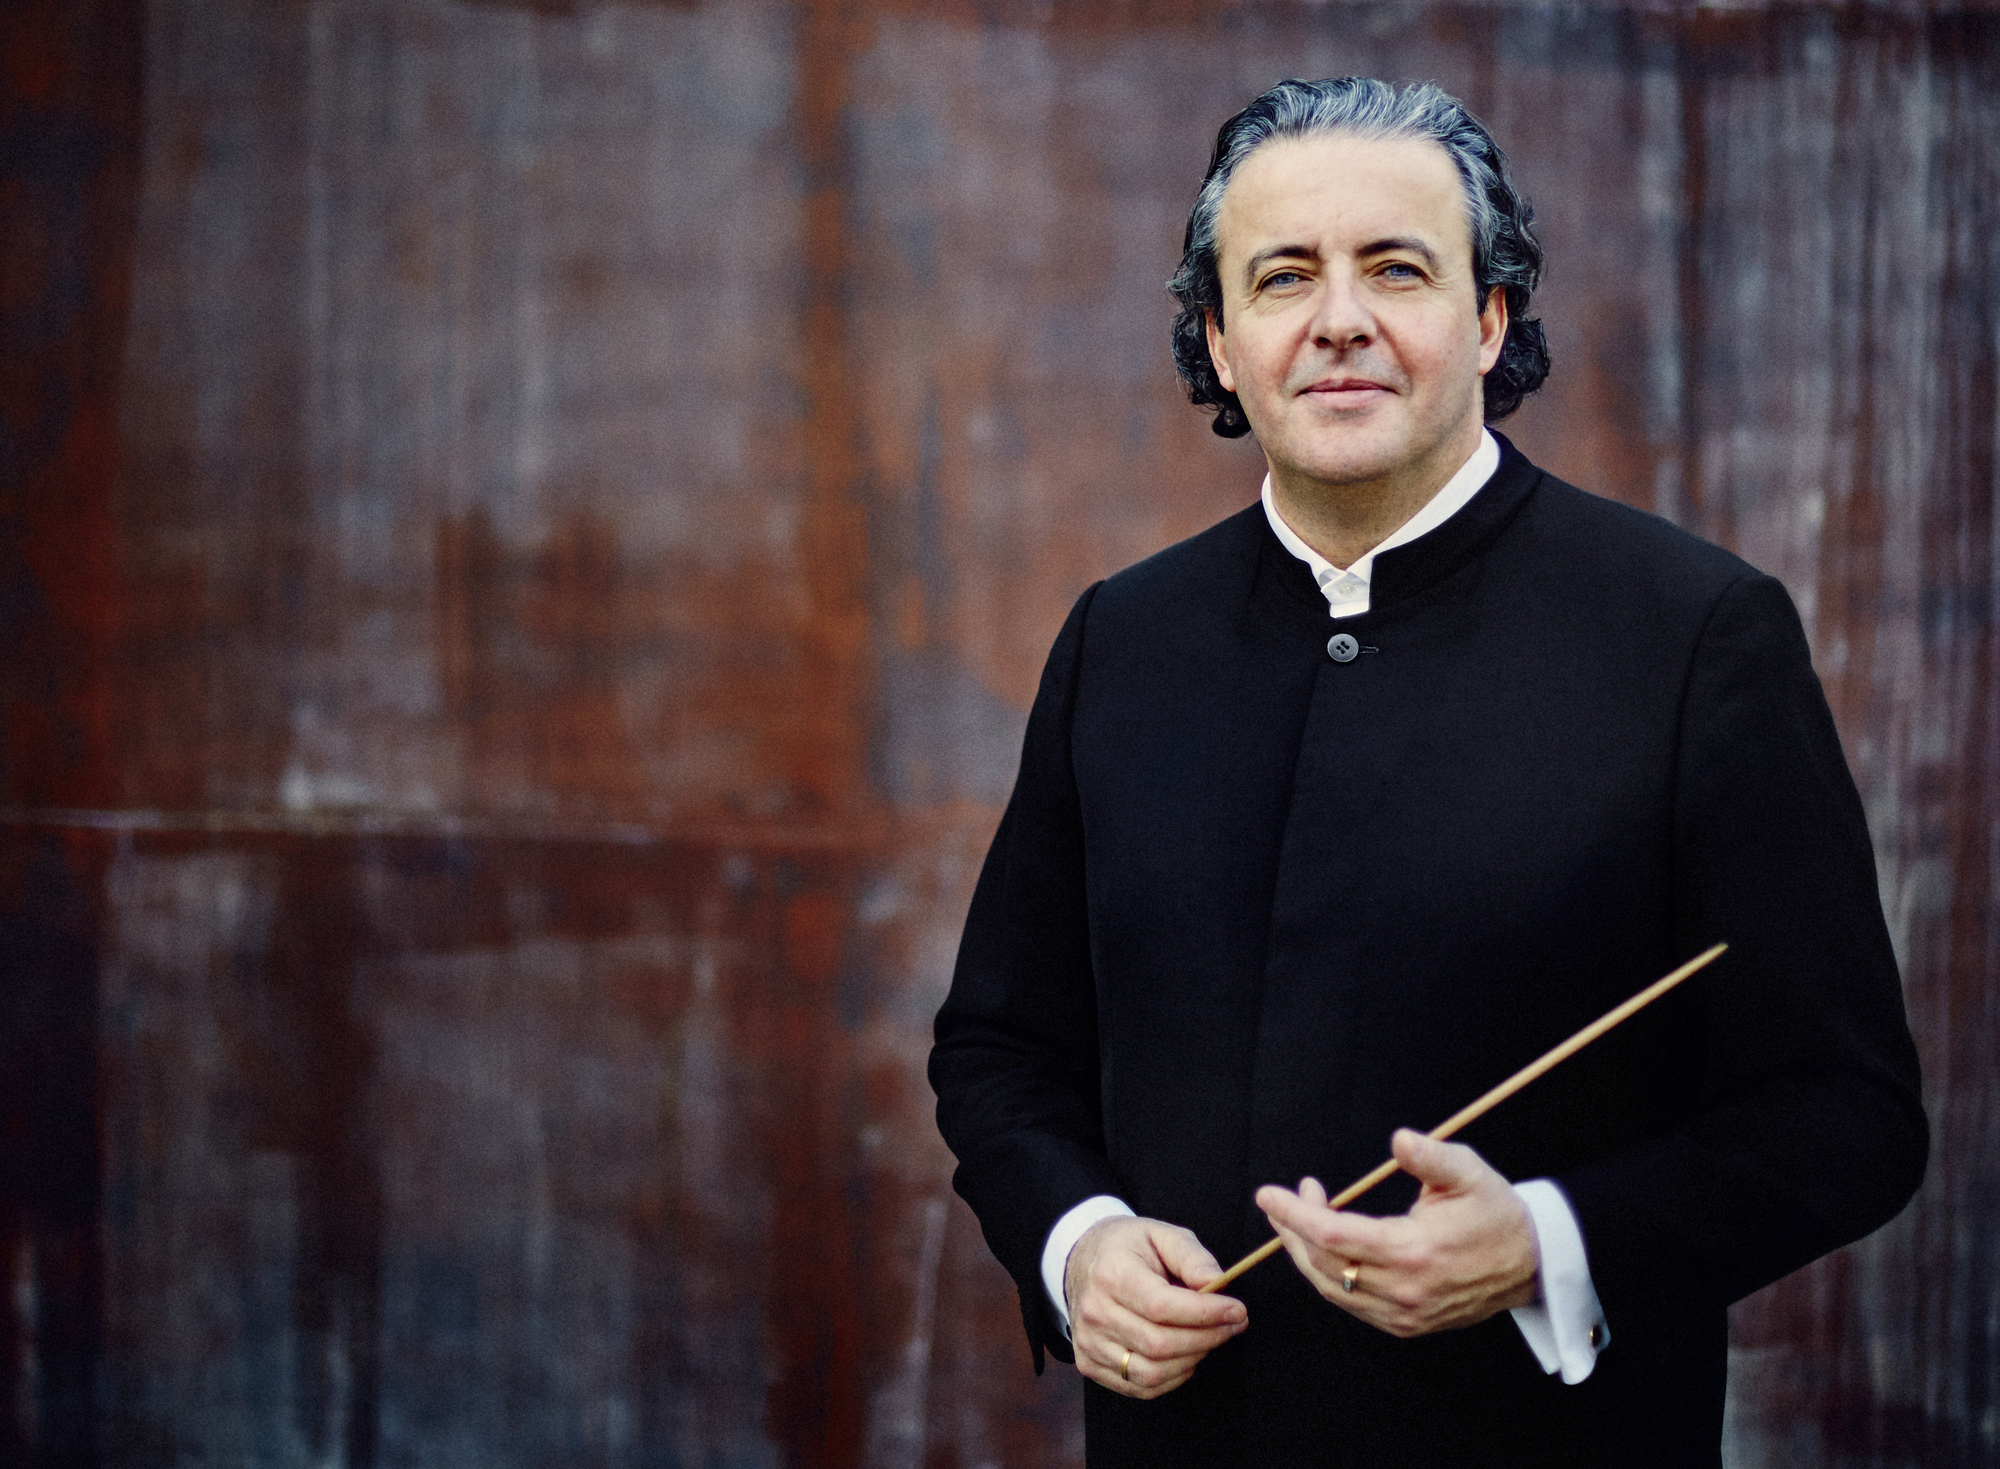 Juanjo Mena: At Orchestra Hall: May 3-4. Résumé: This Spanish-born conductor successfully led the BBC Philharmonic for seven seasons. He offers a wide repertoire and extensive experience conducting top international orchestras.